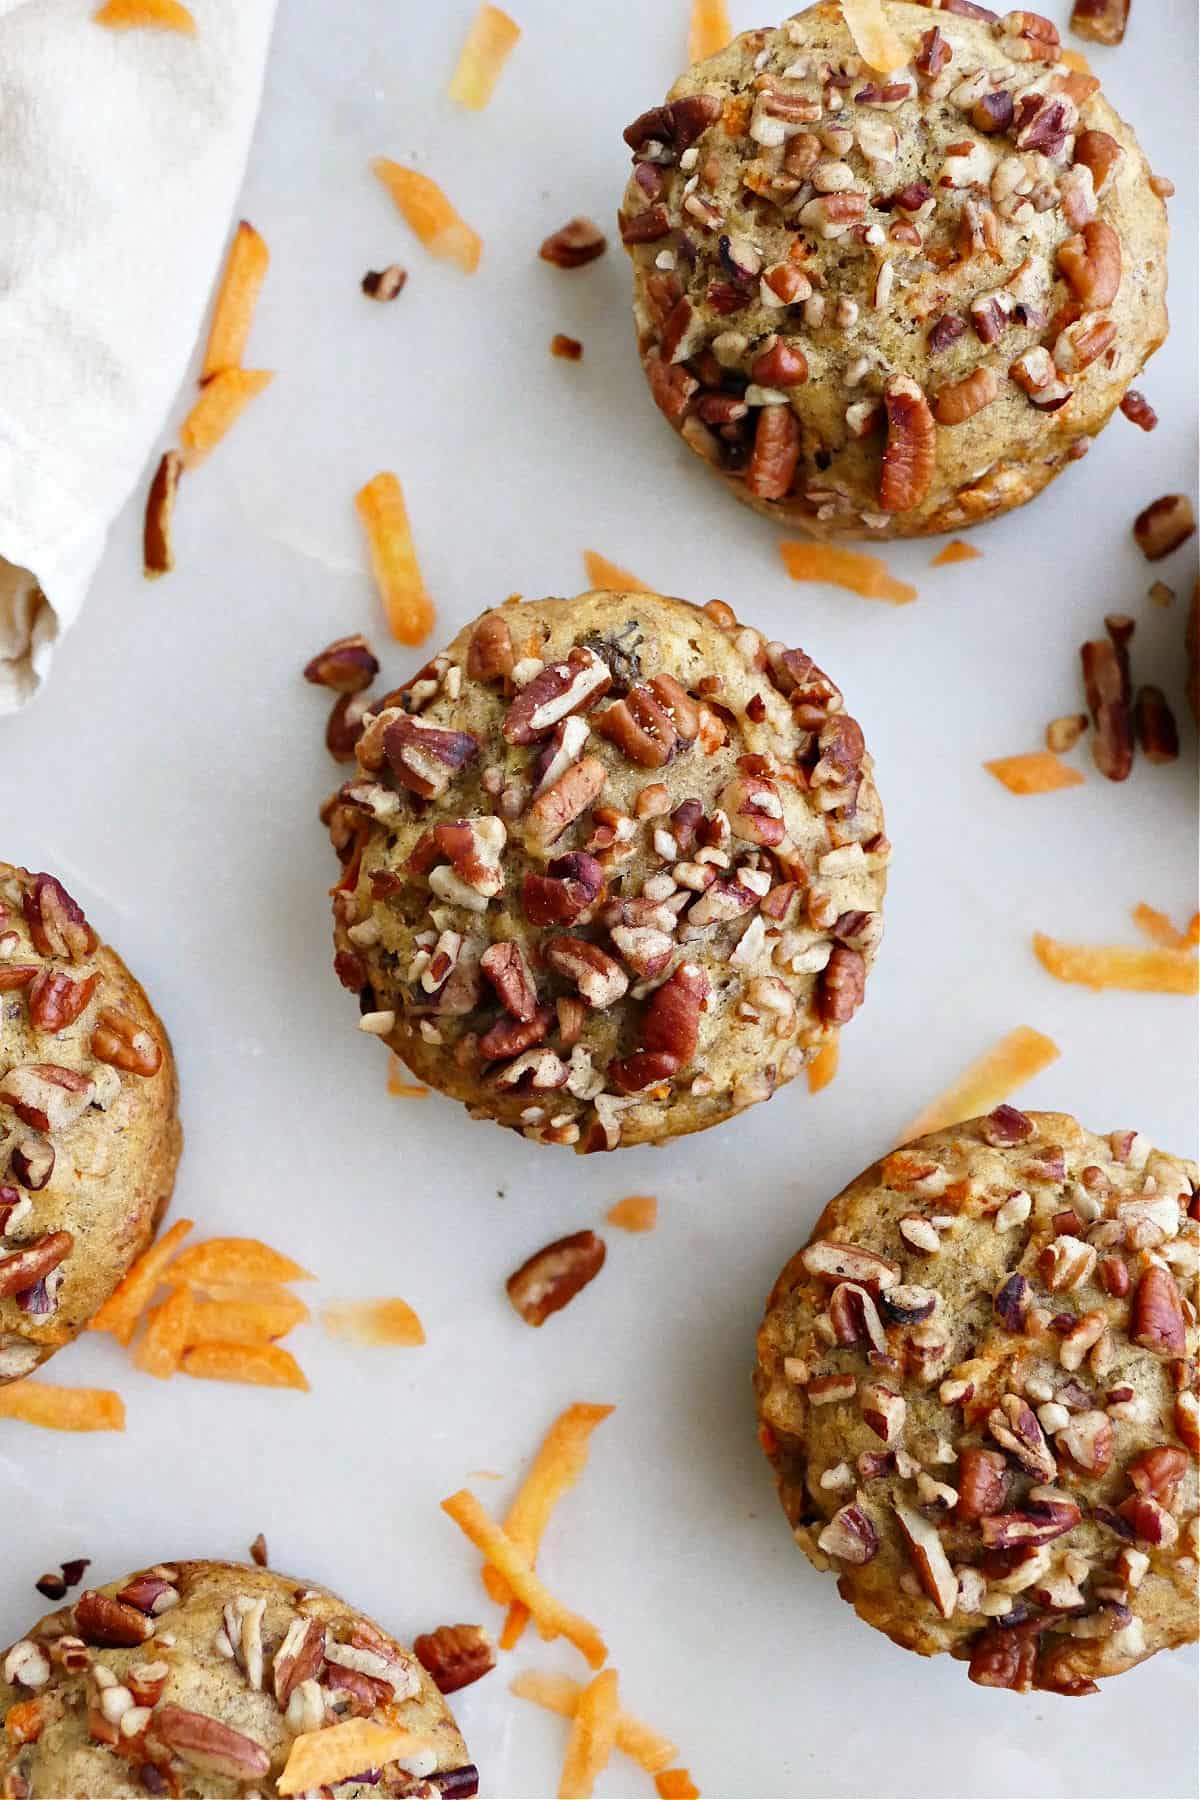 banana carrot muffins on a counter next to shredded carrots and pecans